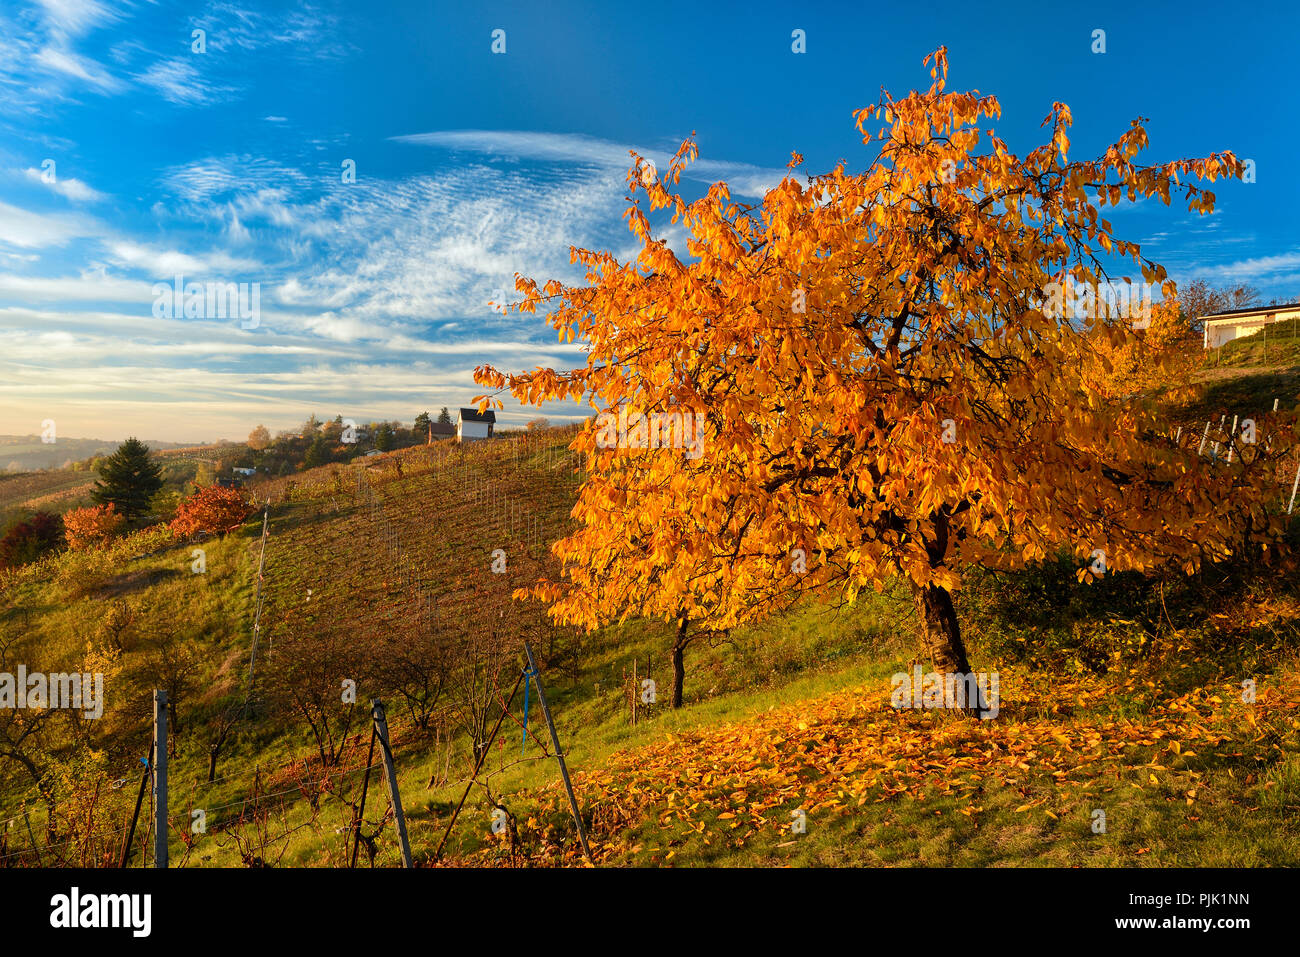 Autumn in the Höhnstedter wine growing area, vineyard and cherry tree in full autumn colour, Höhnstedt, Saxony-Anhalt, Germany Stock Photo